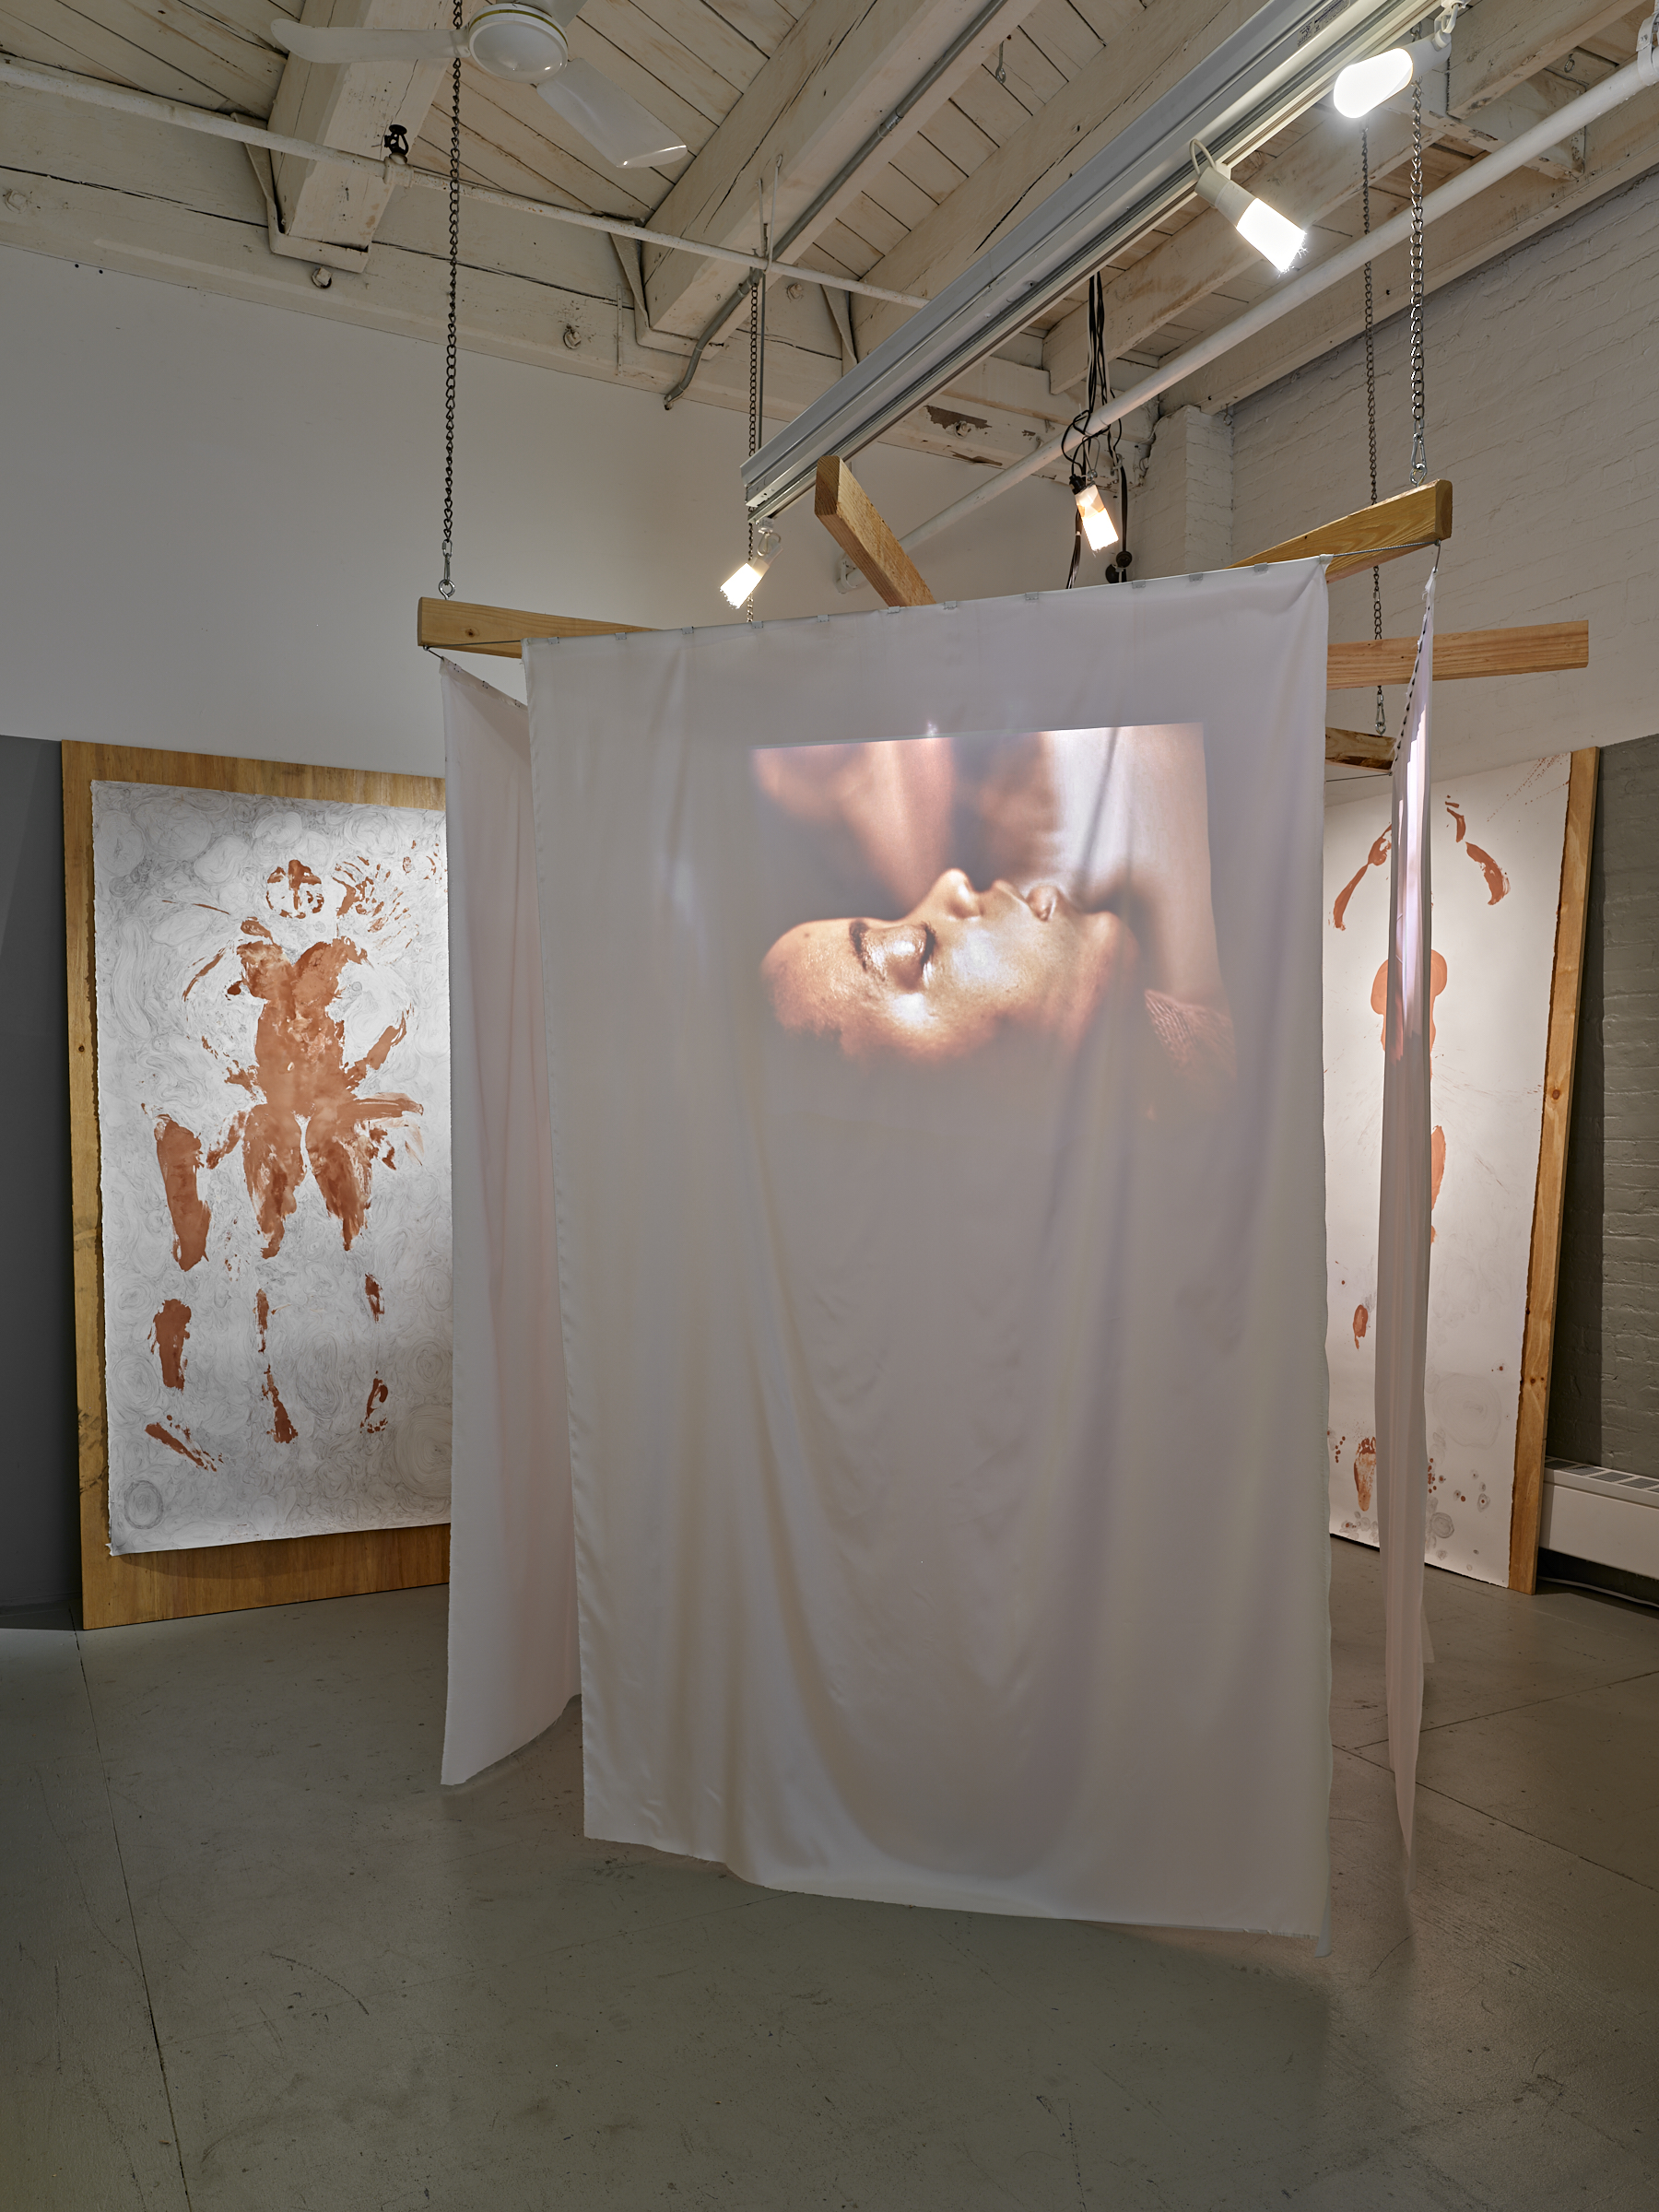 This is a view of the gallery installation which shows a video still that is rear projected onto a white sheet of the face of a young Black woman at rest with her eyes closed. The sheet hangs from a wooden structure suspended from the ceiling. Behind it there is a brown body print with line drawings around it on a large sheet of white paper mounted on a plywood sheet.